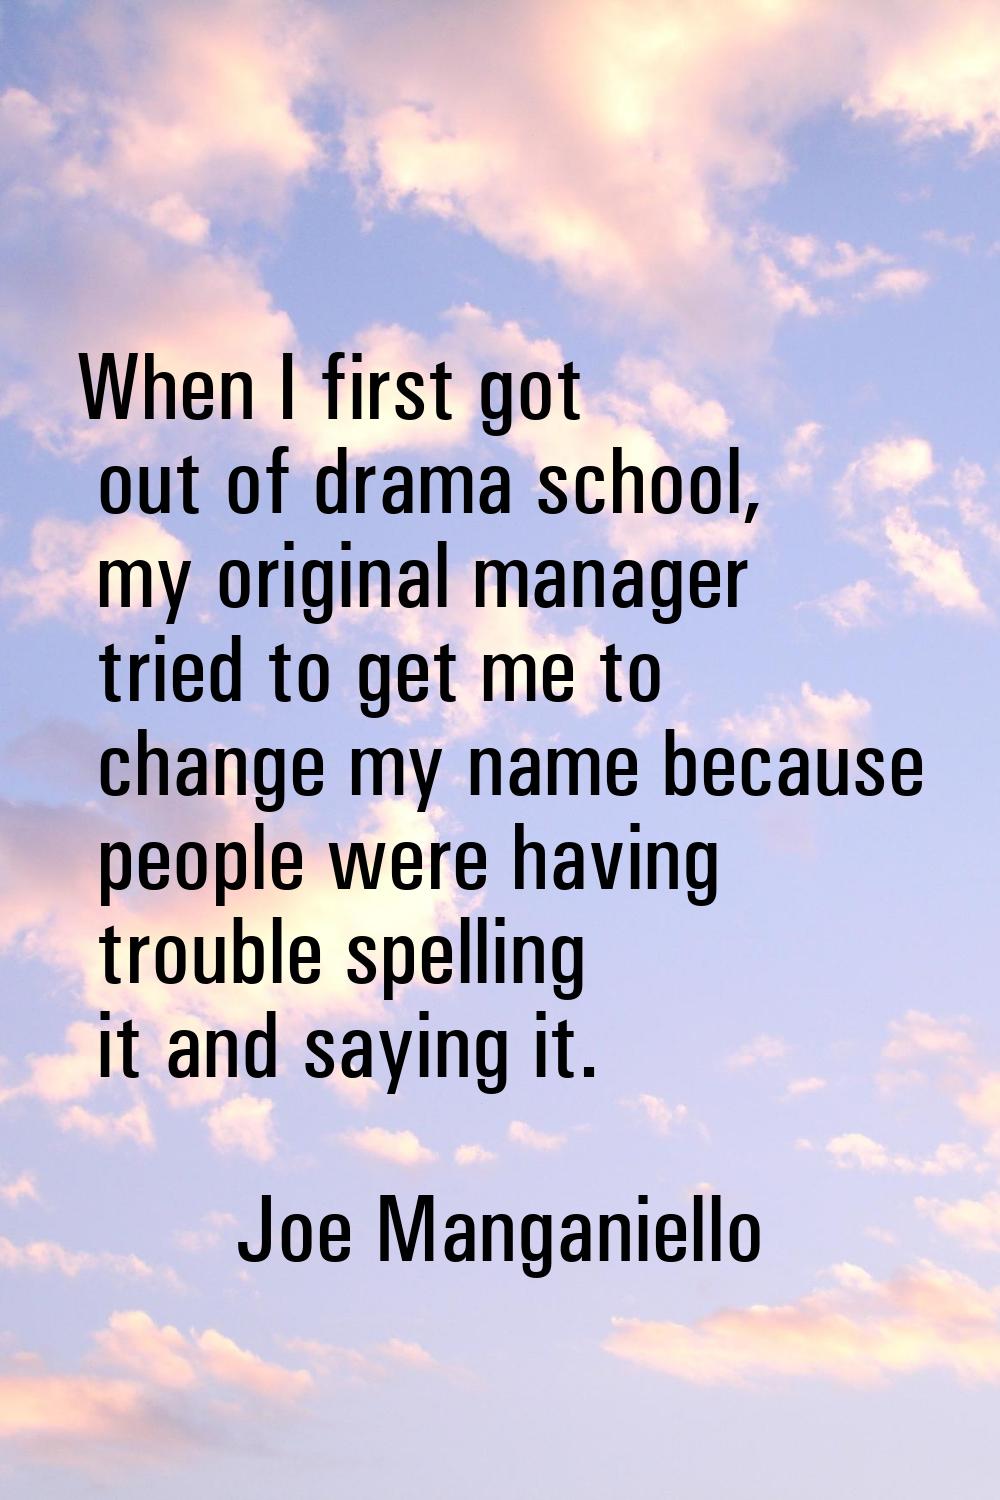 When I first got out of drama school, my original manager tried to get me to change my name because